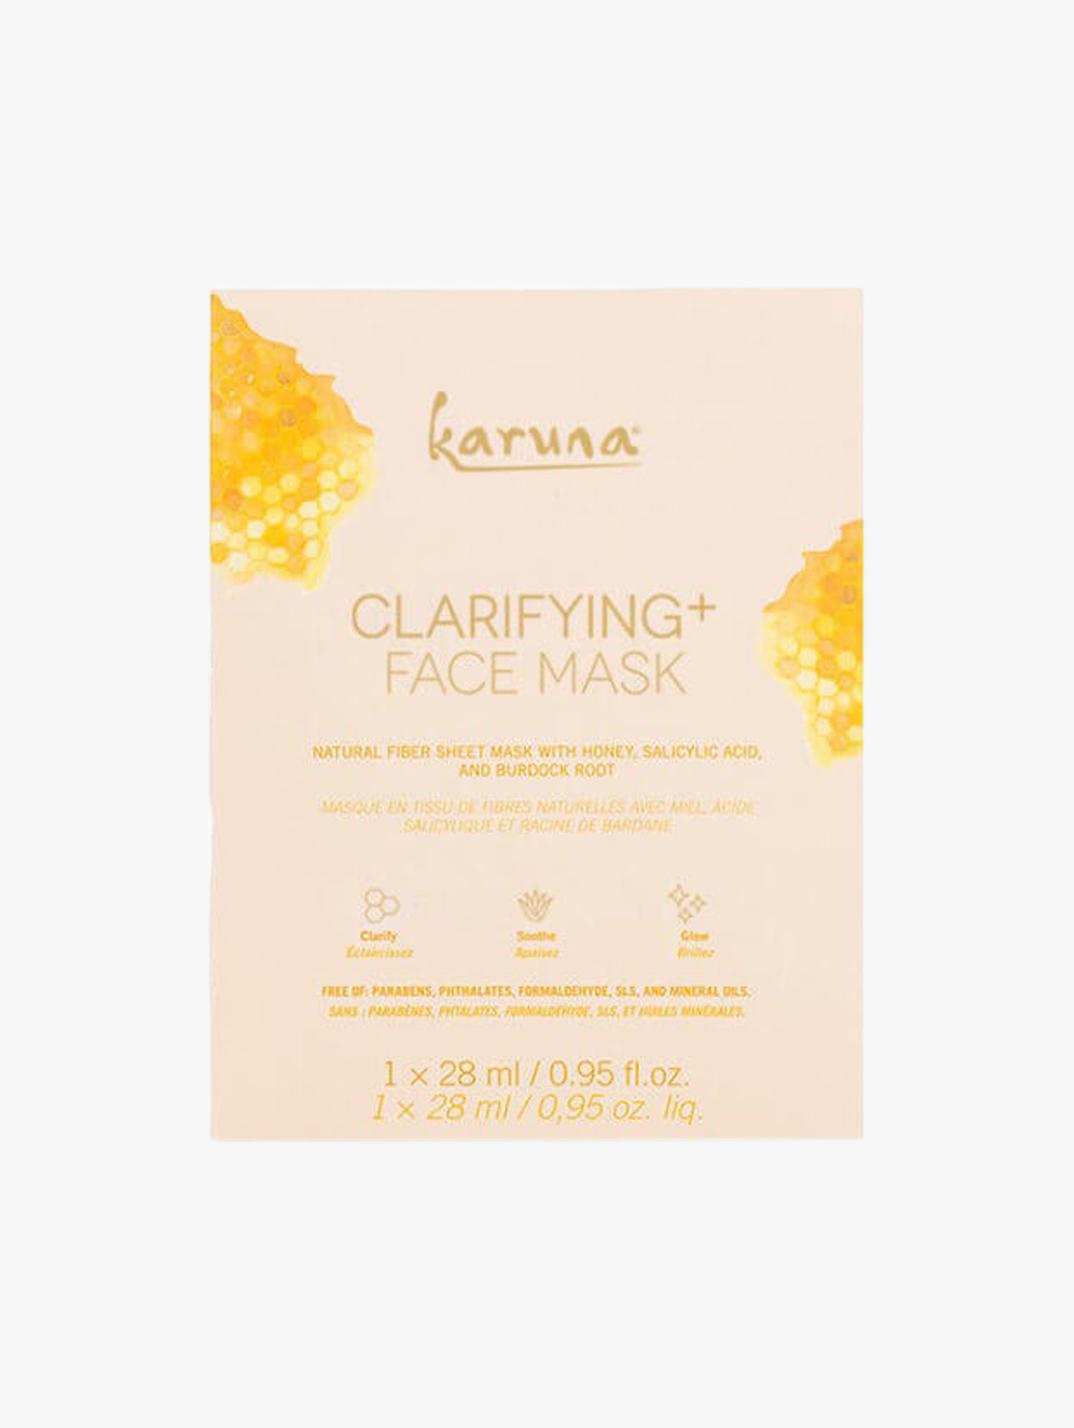 Acne Prone and Blemish Clearing Face Masks MECCA Australia